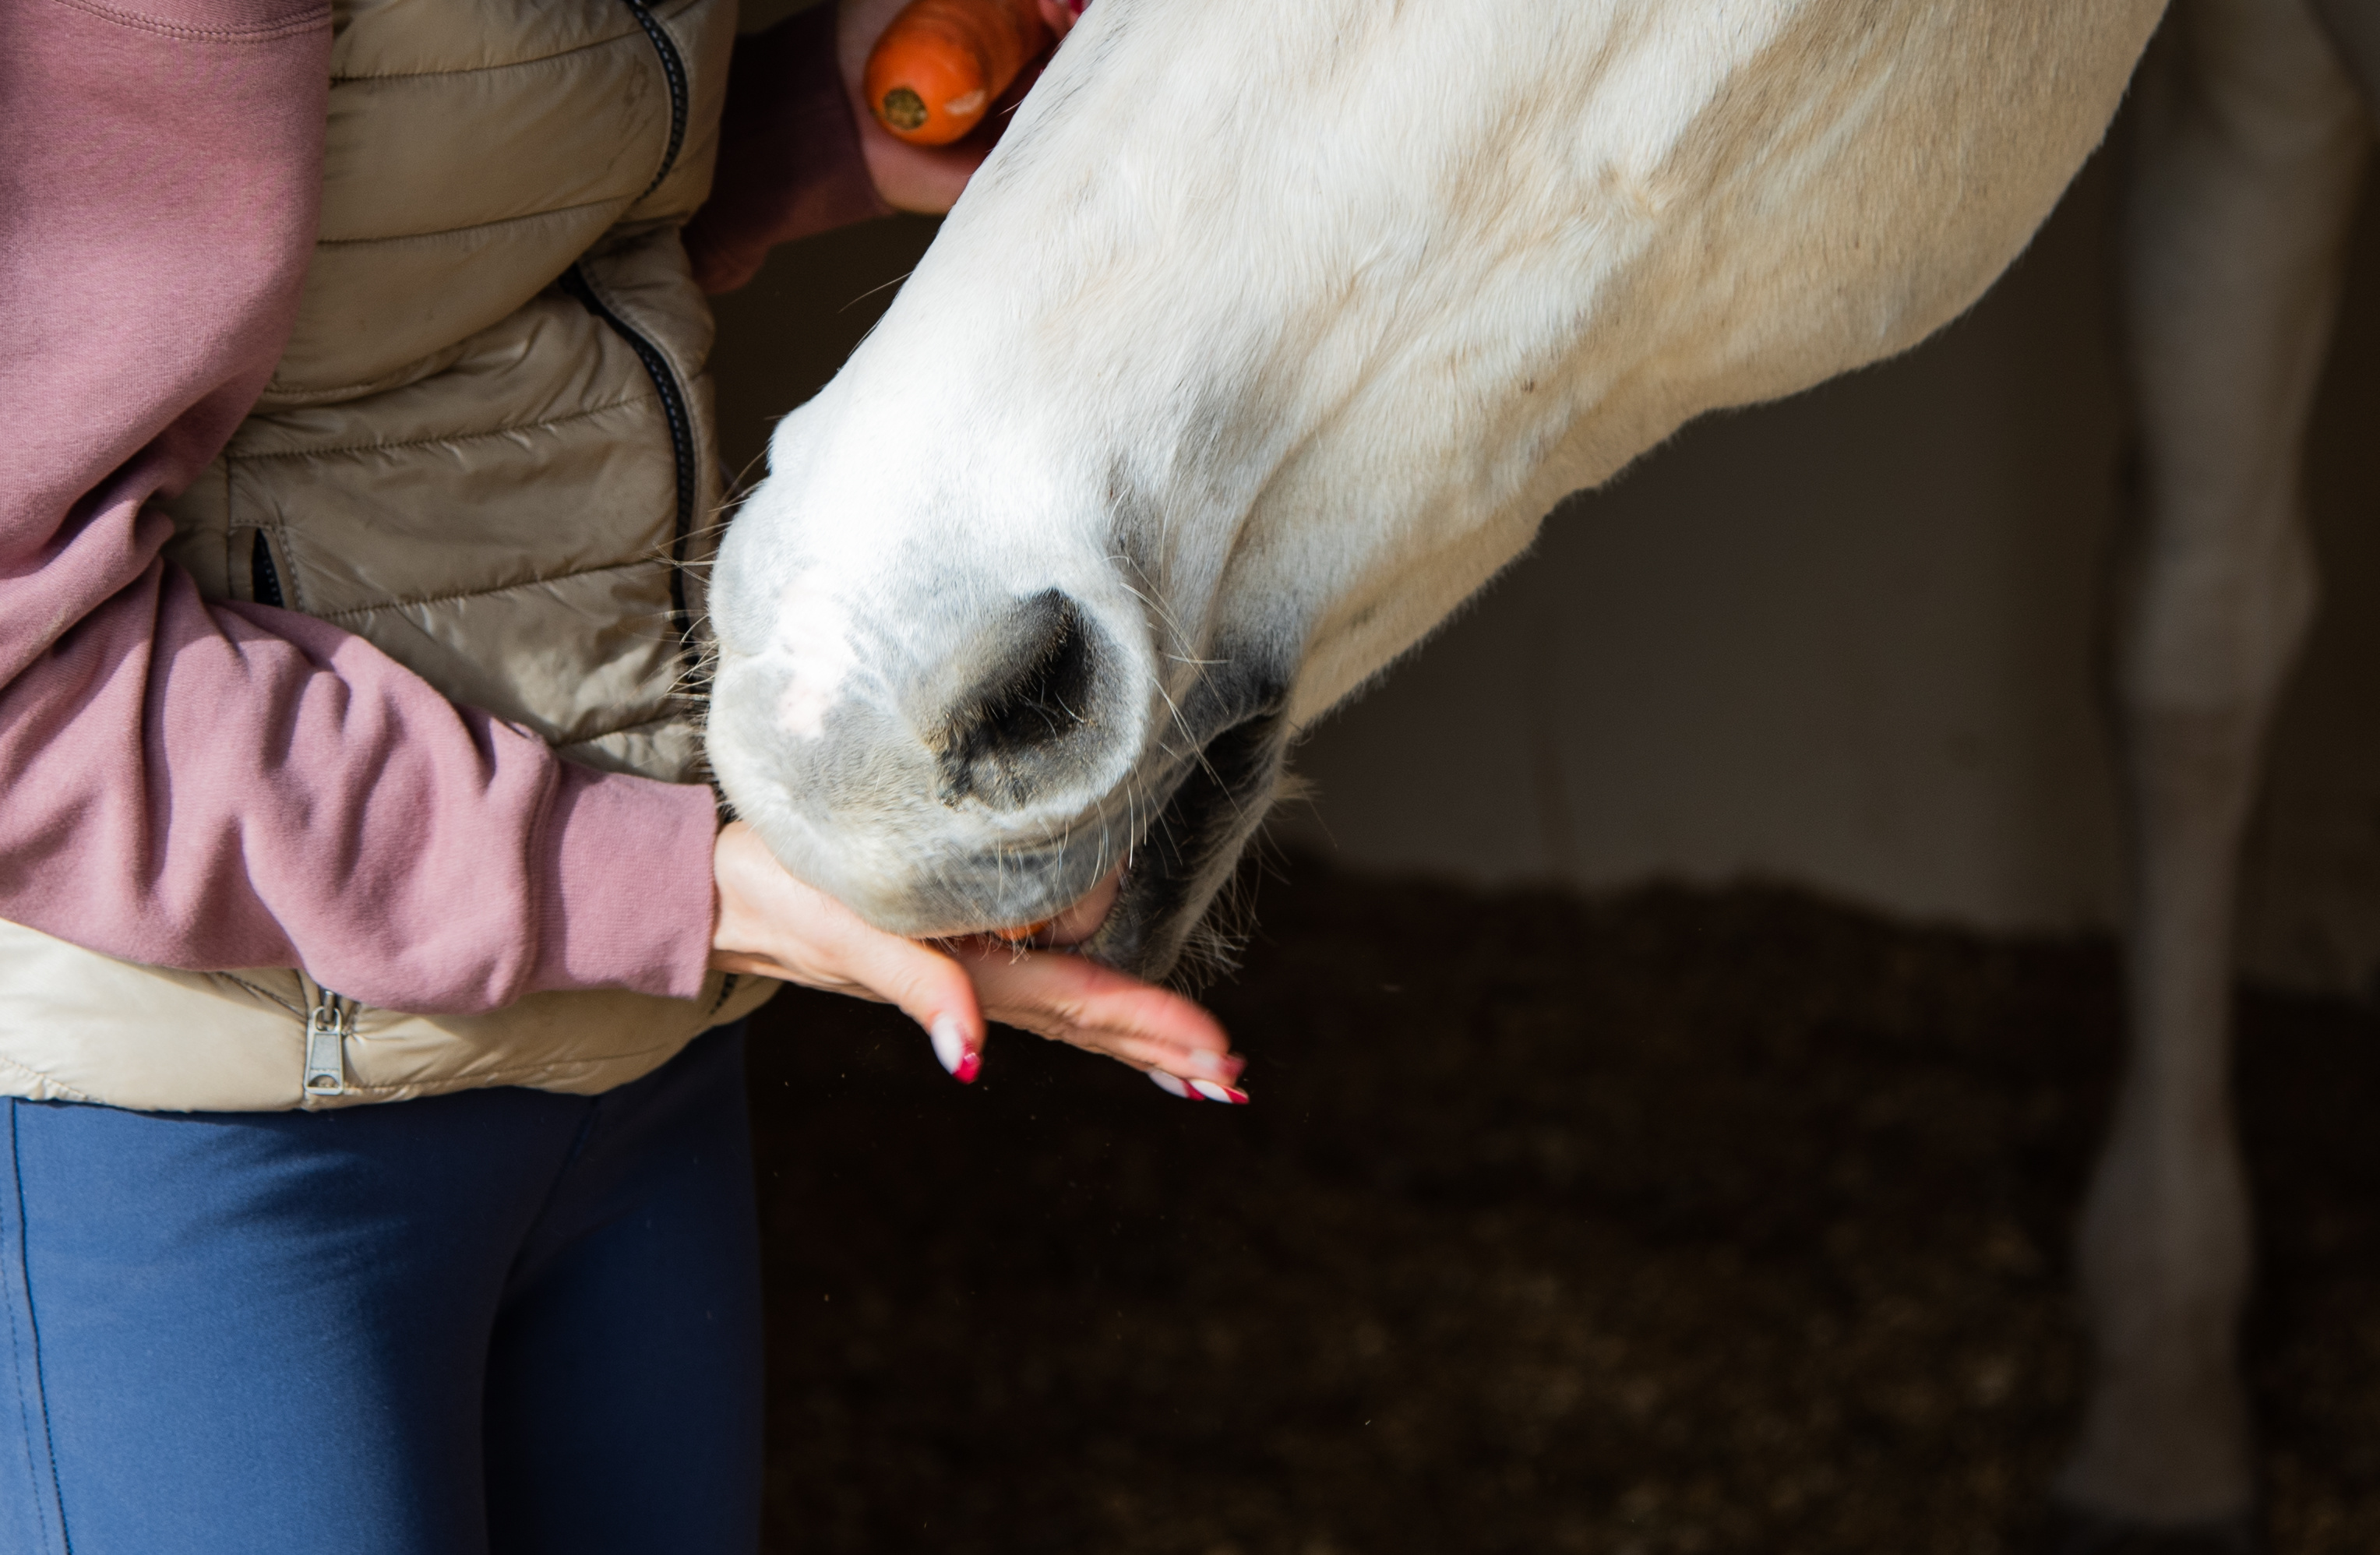 A horse eating a treat out of a woman's hand